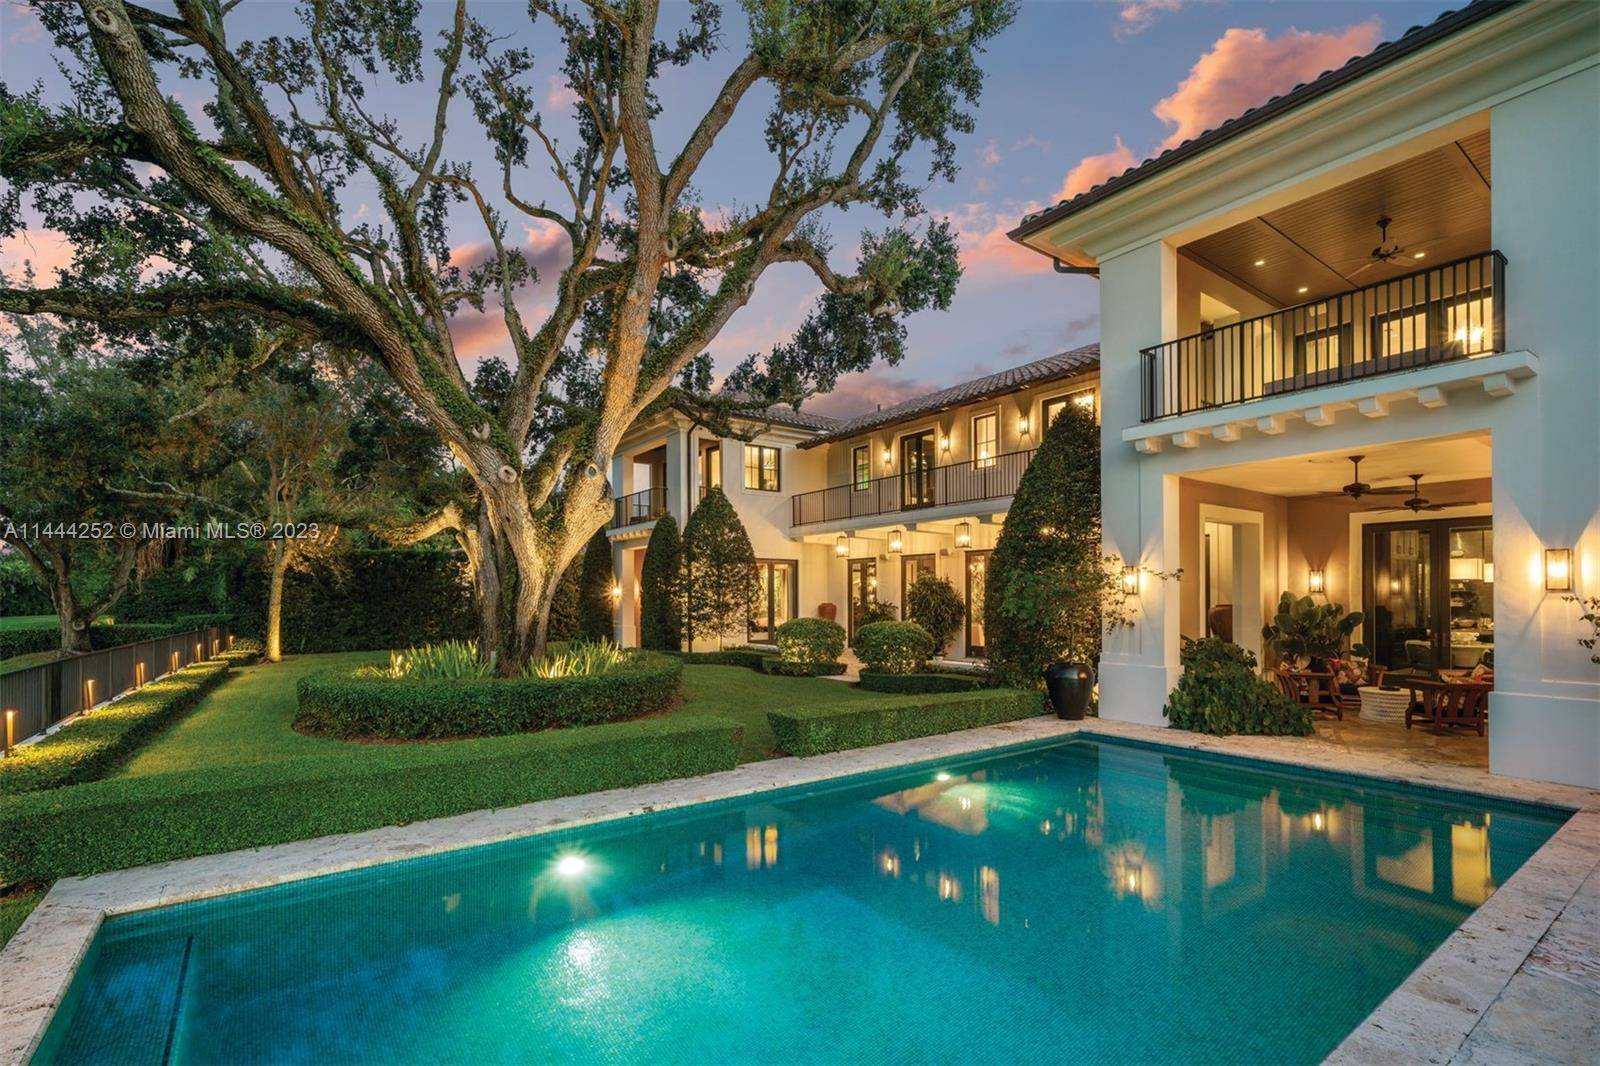 This exceptional 8, 274 SF Coral Gables estate has 6 bedrooms and 5.